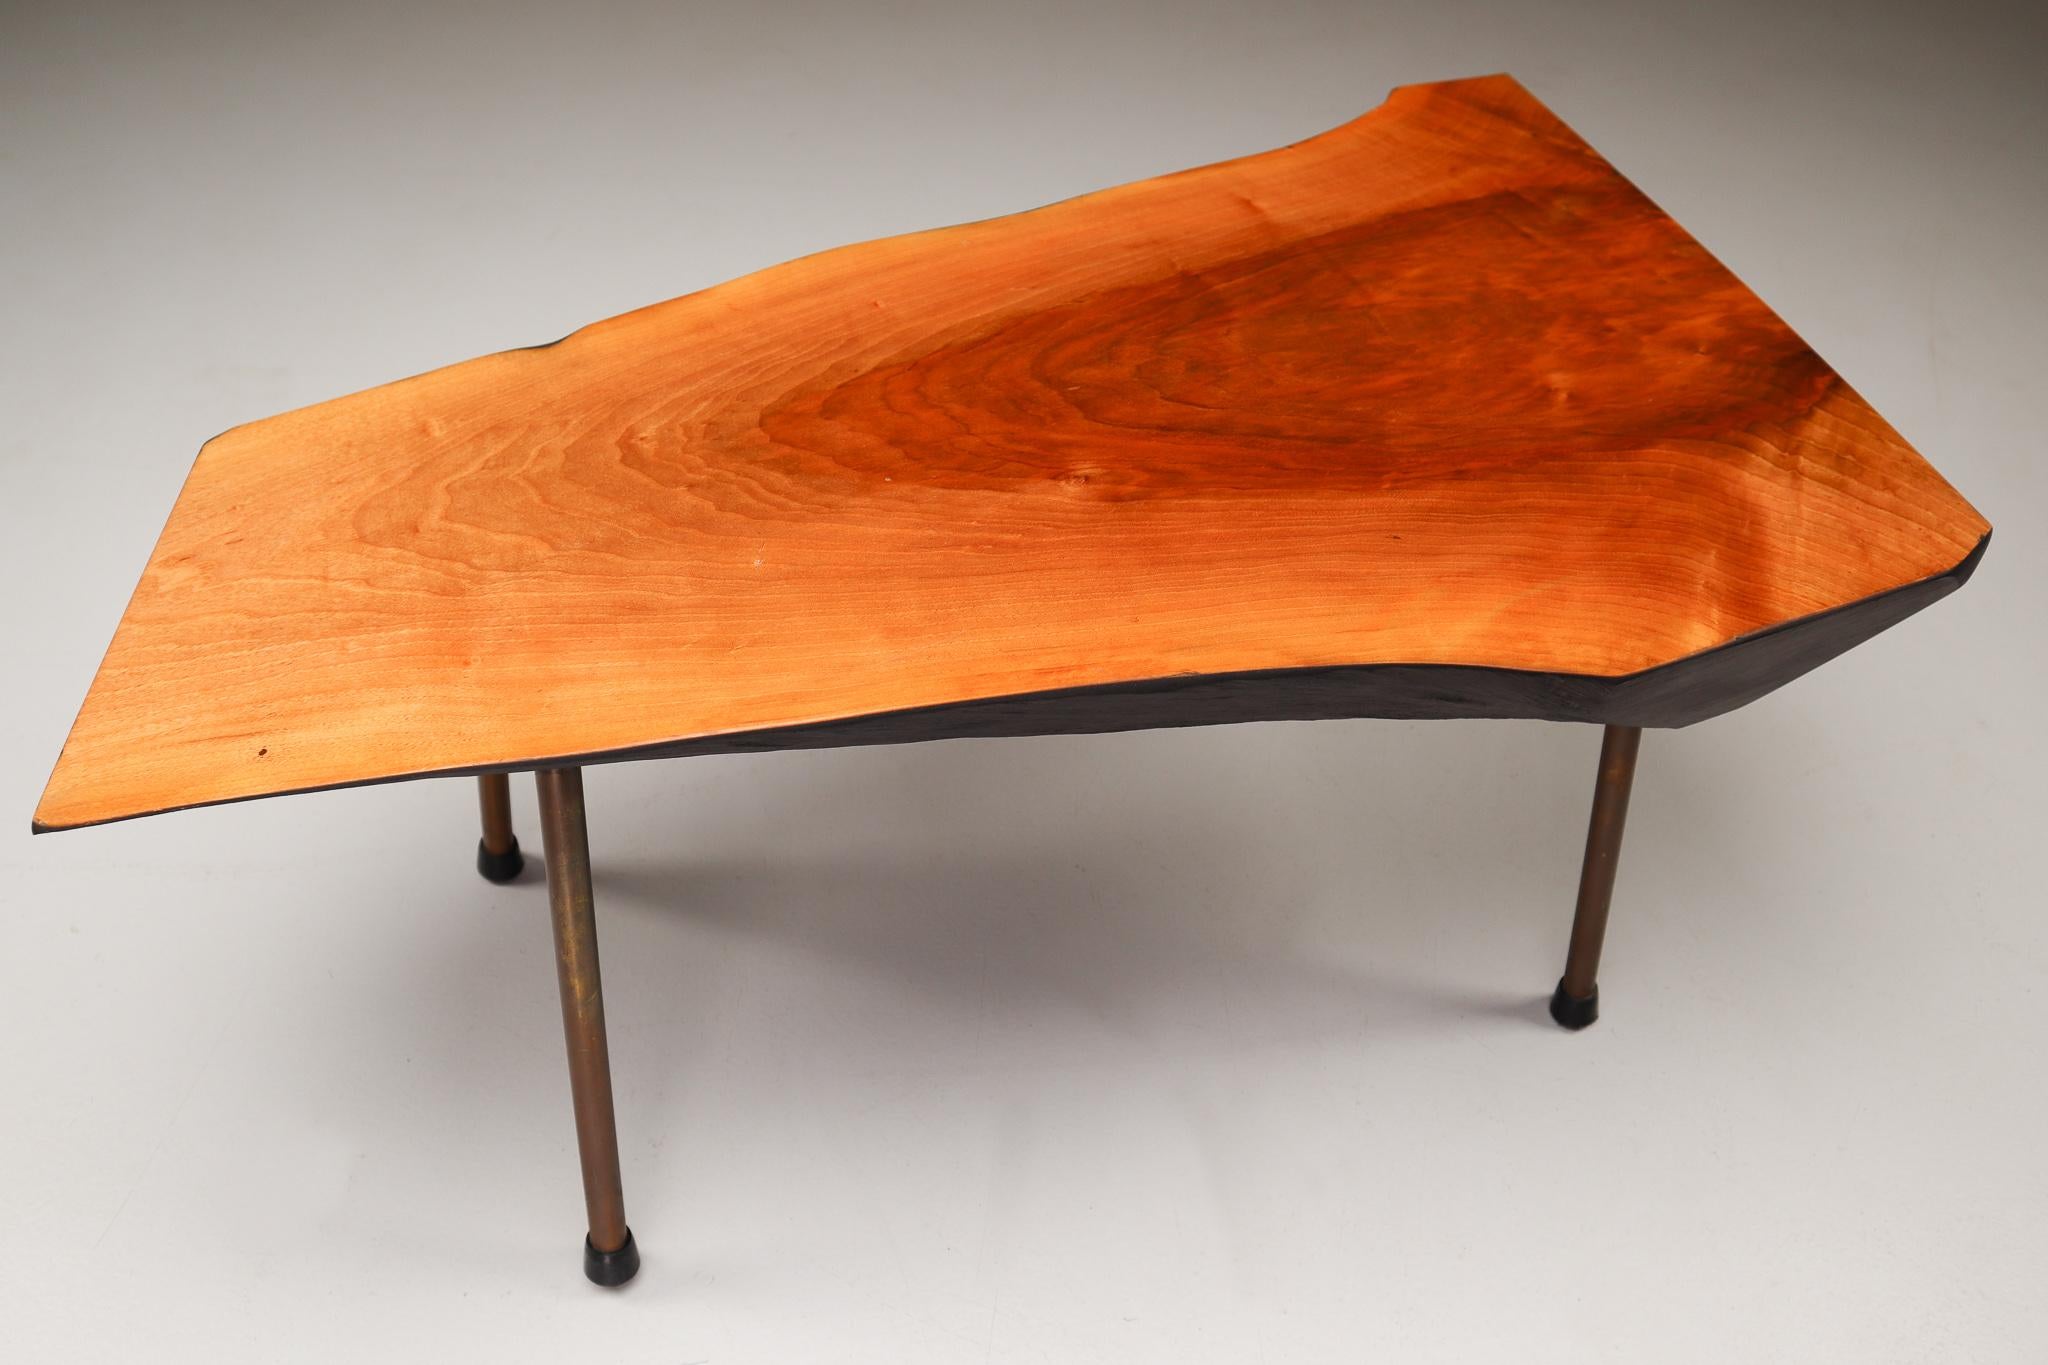 A walnut tree trunk coffee table by Austrian designer Carl Auböck II (often simply referred to as Carl Auböck), from circa 1950s. A large tree trunk table designed and made by the Auböck Werkstätte, circa 1950s. The modernist table is made of